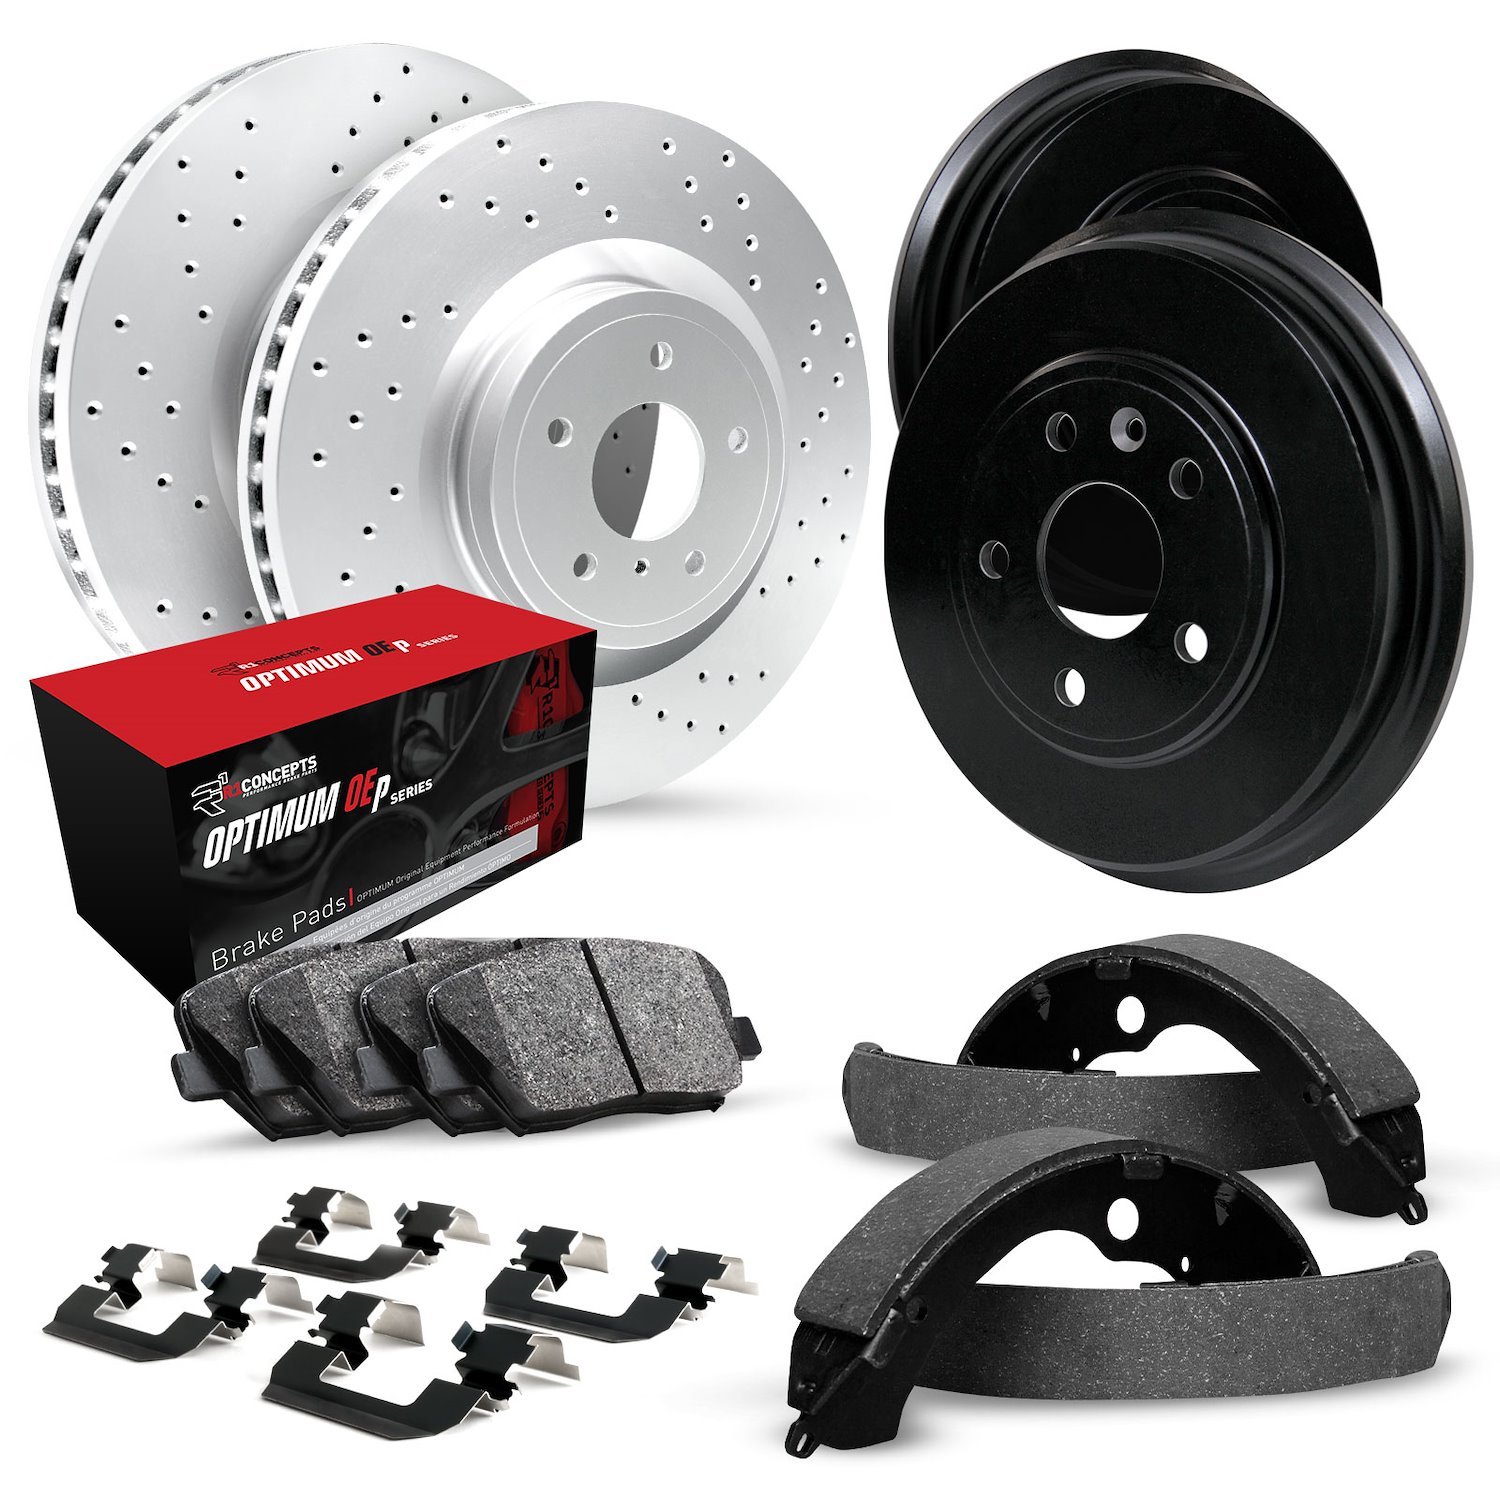 GEO-Carbon Drilled Brake Rotor & Drum Set w/Optimum OE Pads, Shoes, & Hardware, 1988-1999 GM, Position: Front & Rear